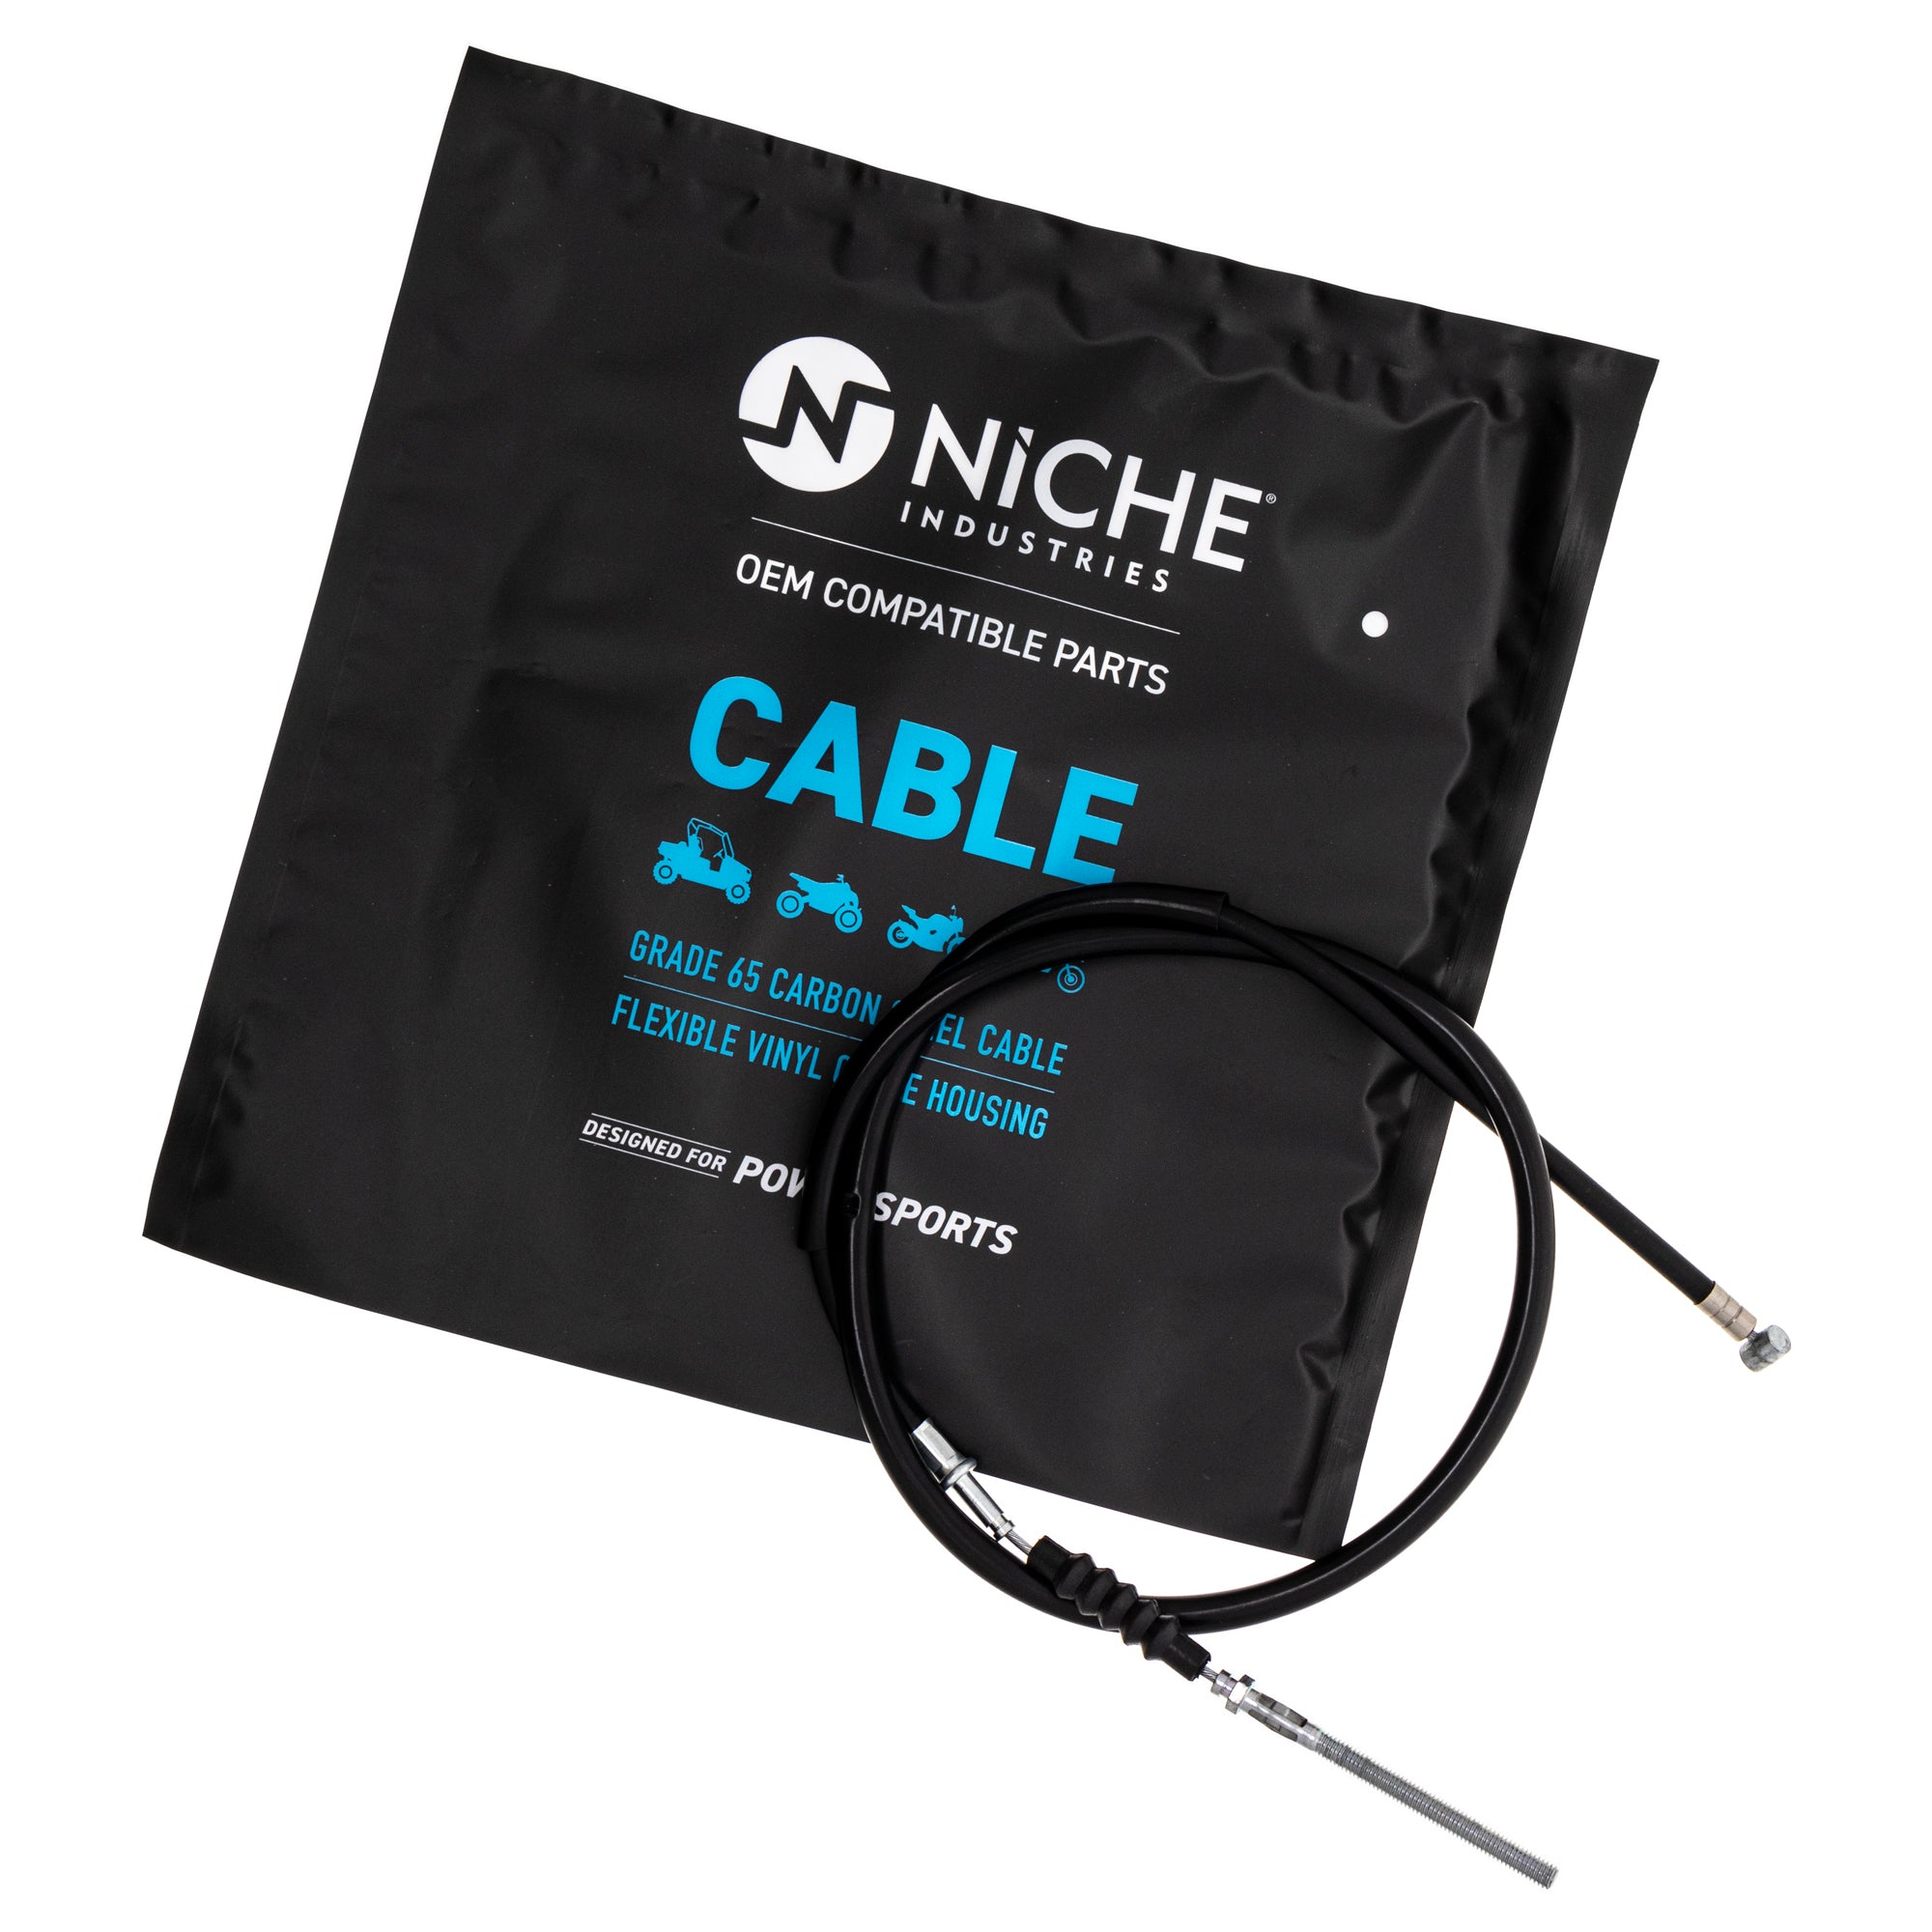 NICHE 519-CCB2938L Front Brake Cable for zOTHER Big ATC200 ATC185S